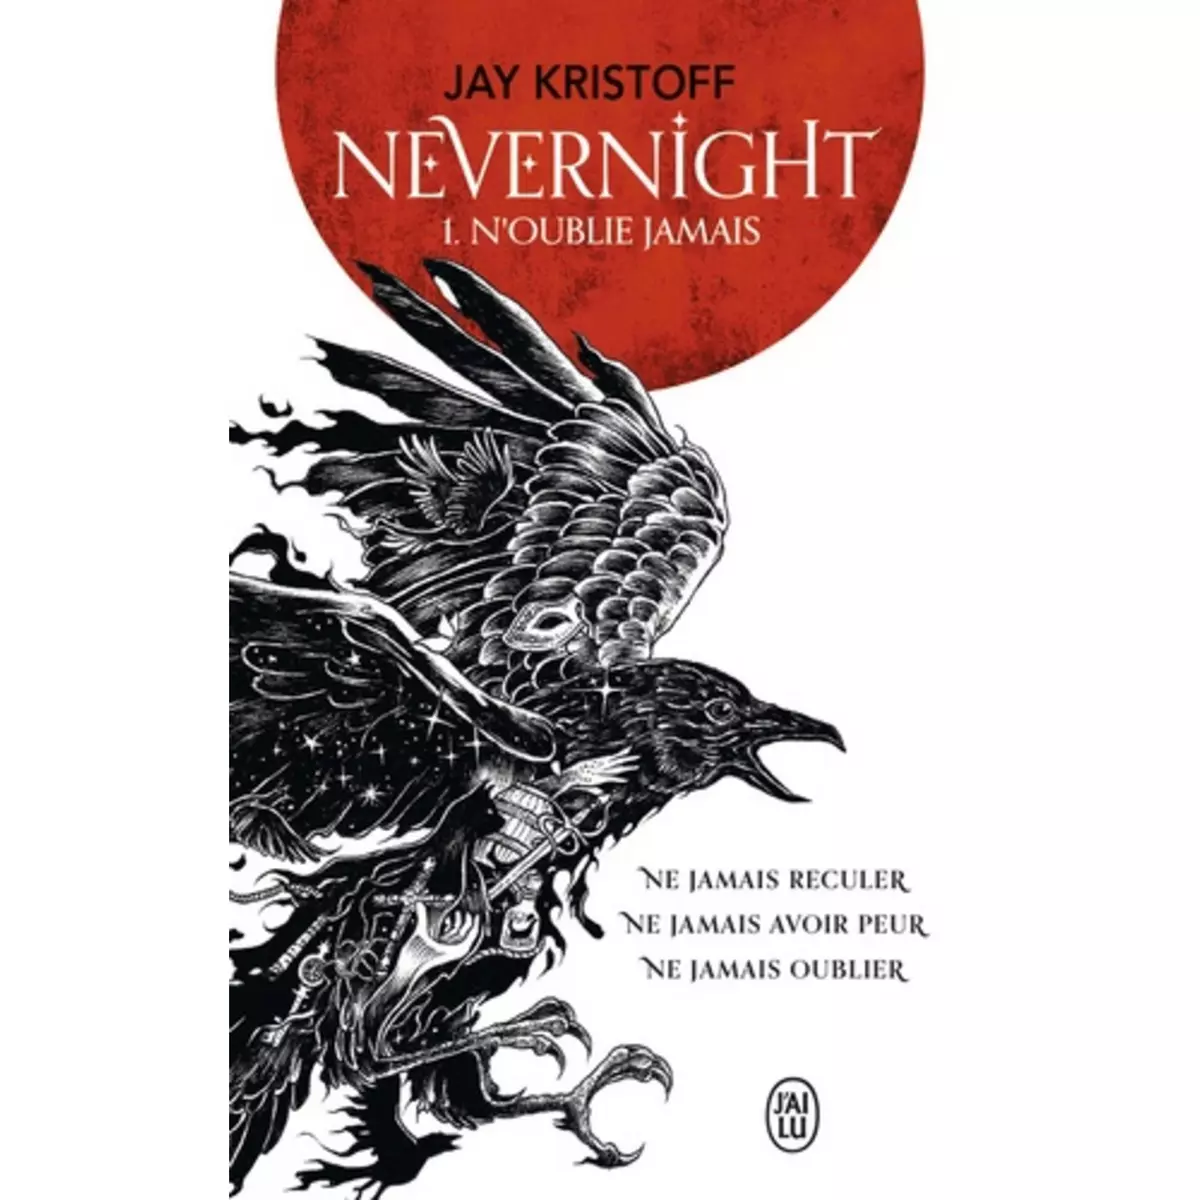  NEVERNIGHT TOME 1 : N'OUBLIE JAMAIS, Kristoff Jay